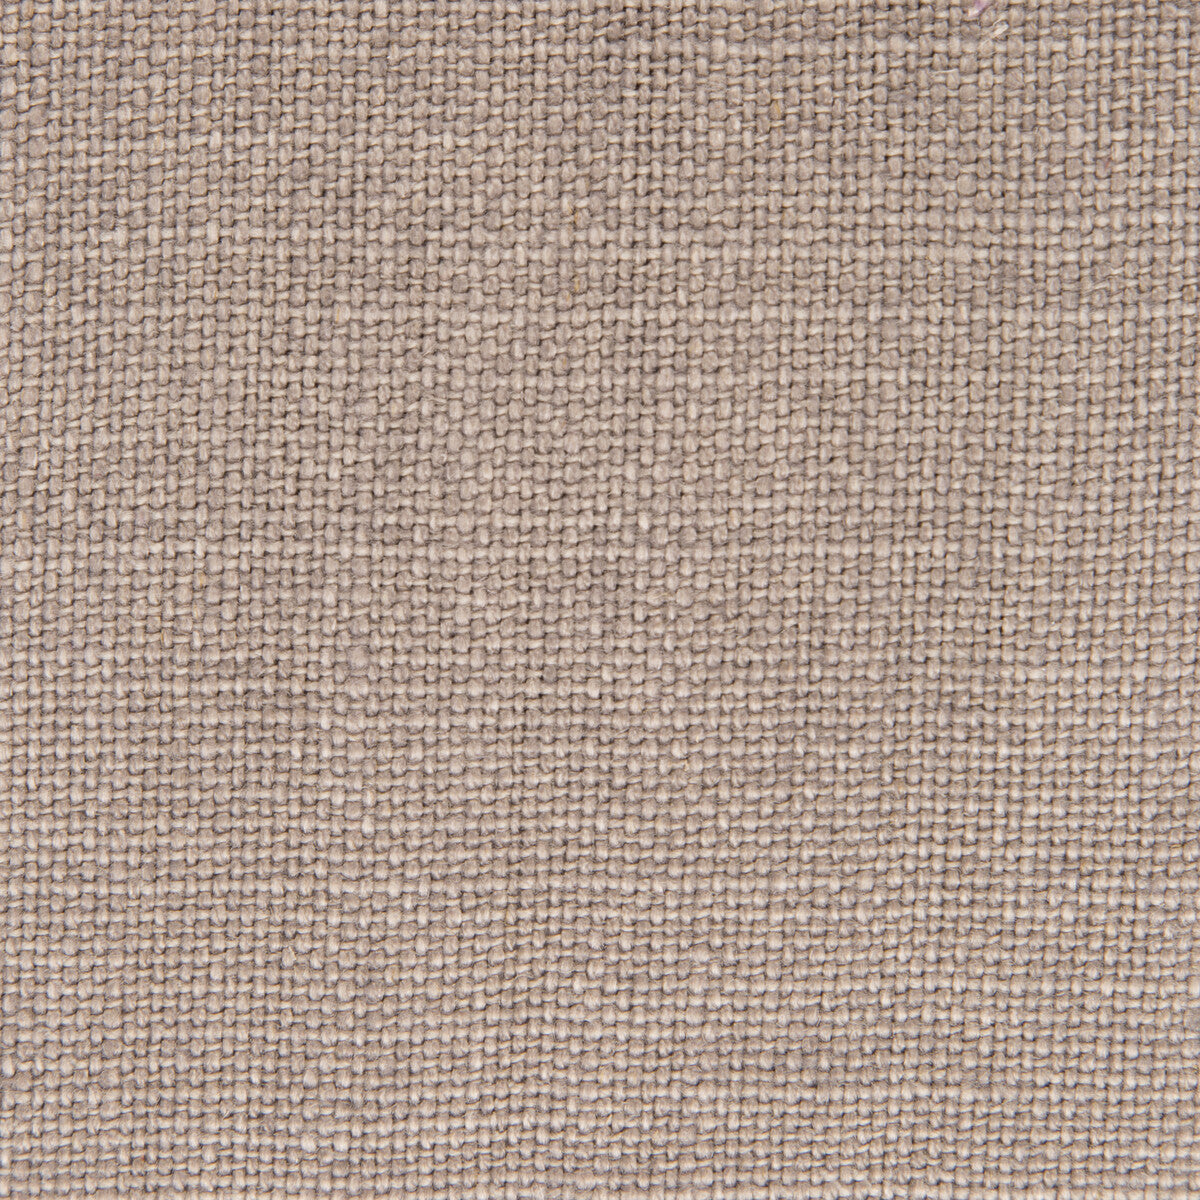 Nicaragua fabric in malva color - pattern GDT5239.005.0 - by Gaston y Daniela in the Basics collection